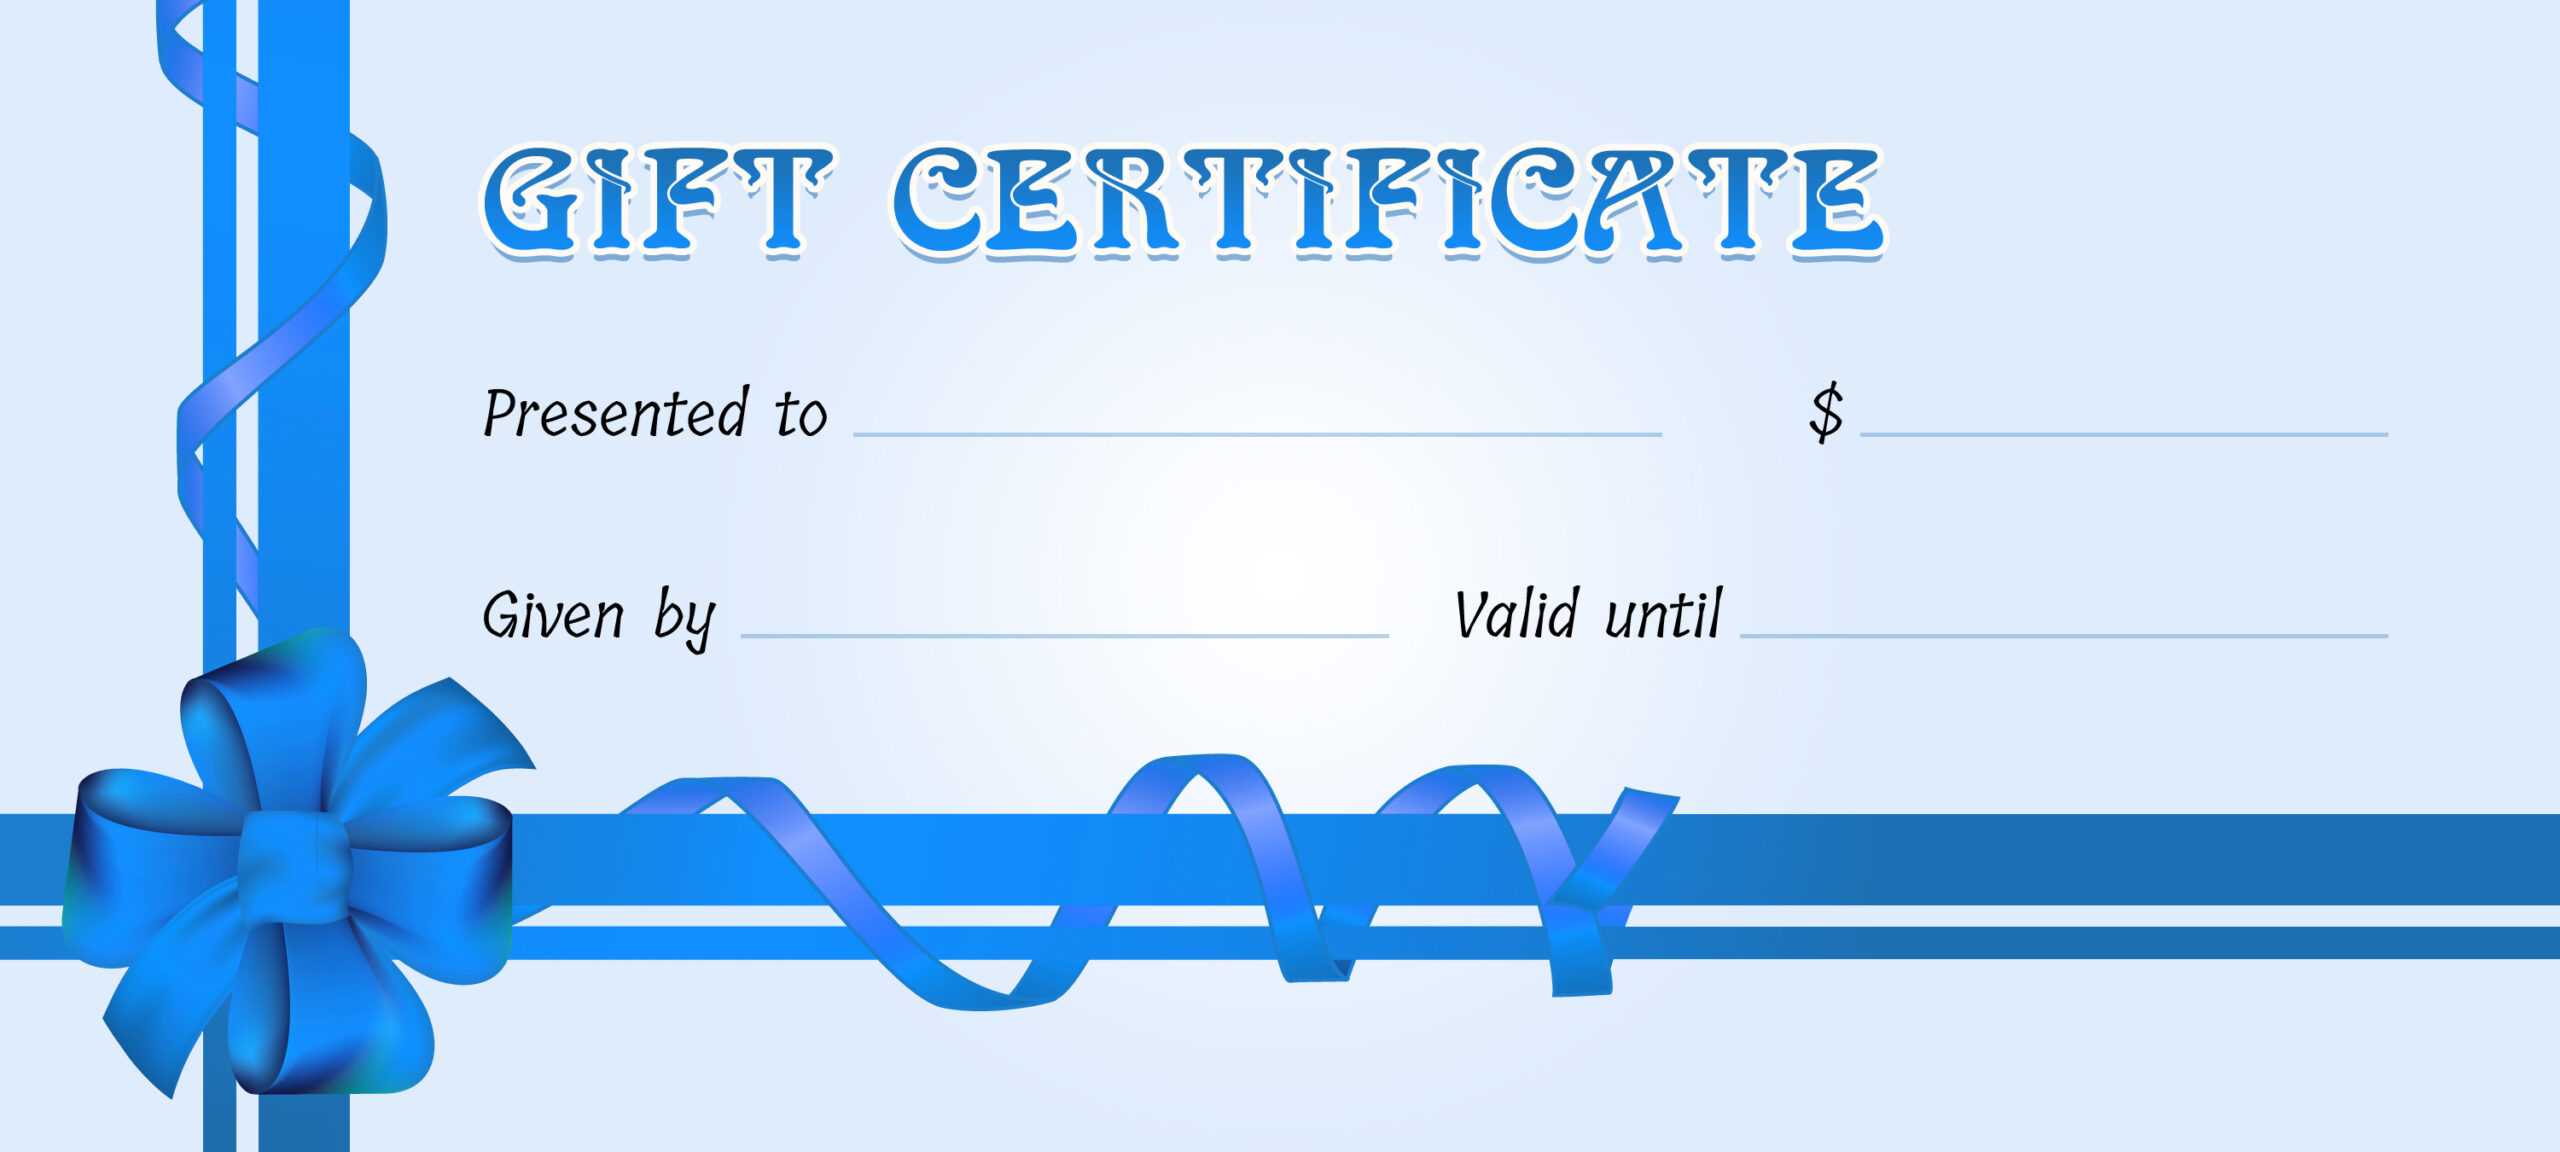 Gift Certificate Template Microsoft Publisher Regarding Gift Certificate Template Publisher